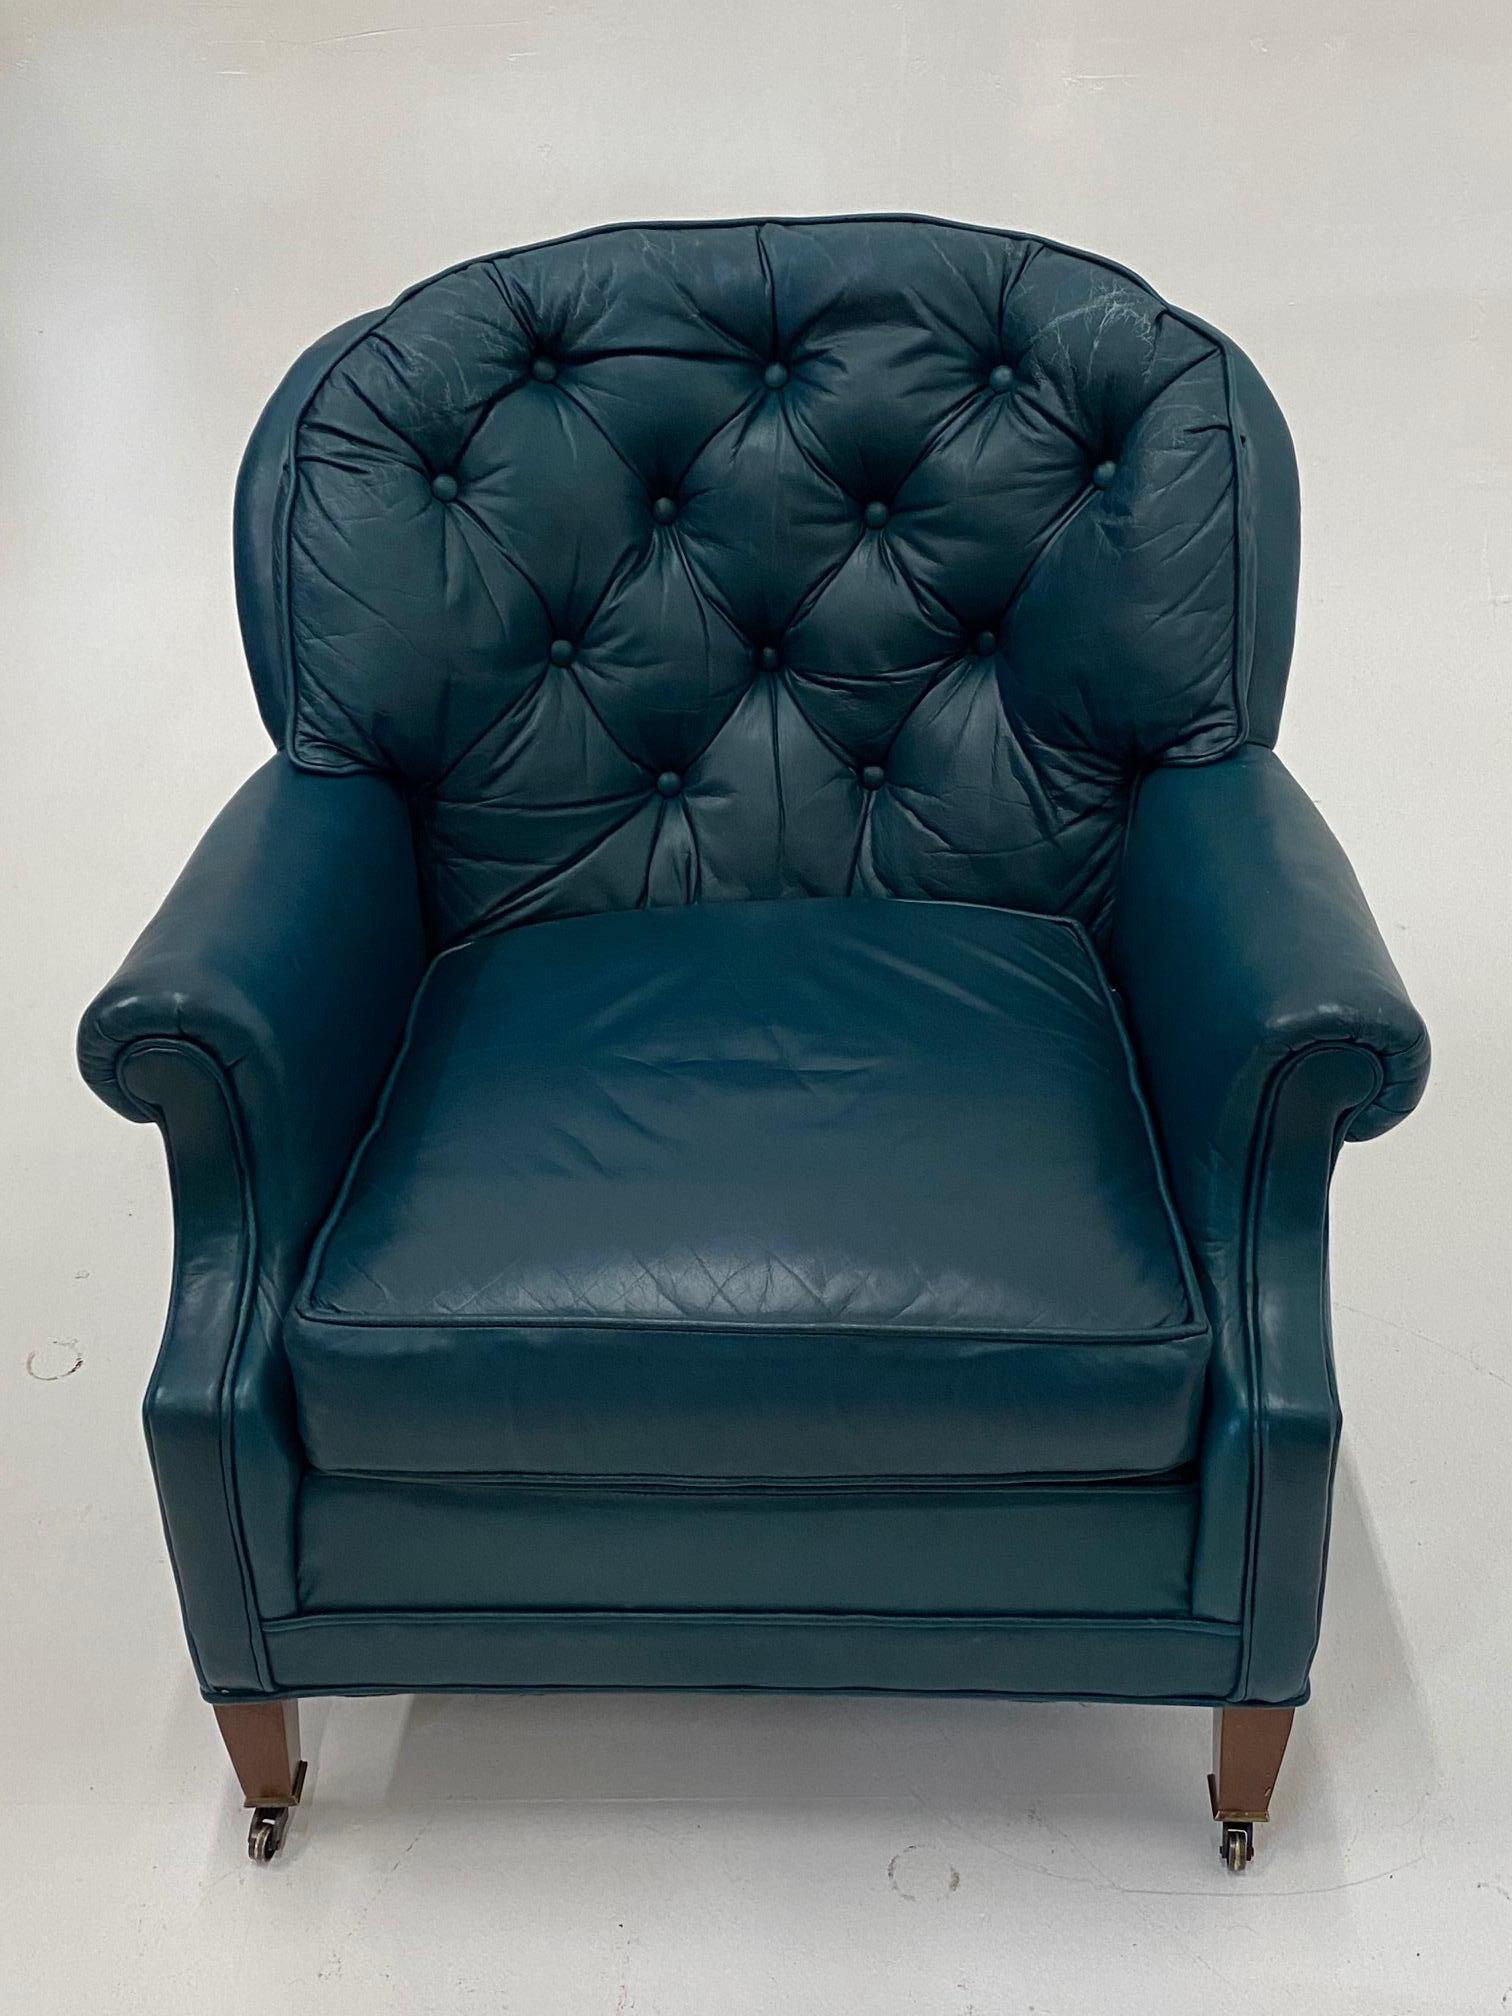 A yummy comfy tufted leather club chair and half moon ottoman in a striking shade of teal blue.
Measures: Ottoman is 15.5 H, 27 W, 21 D
Arm height 22.
 